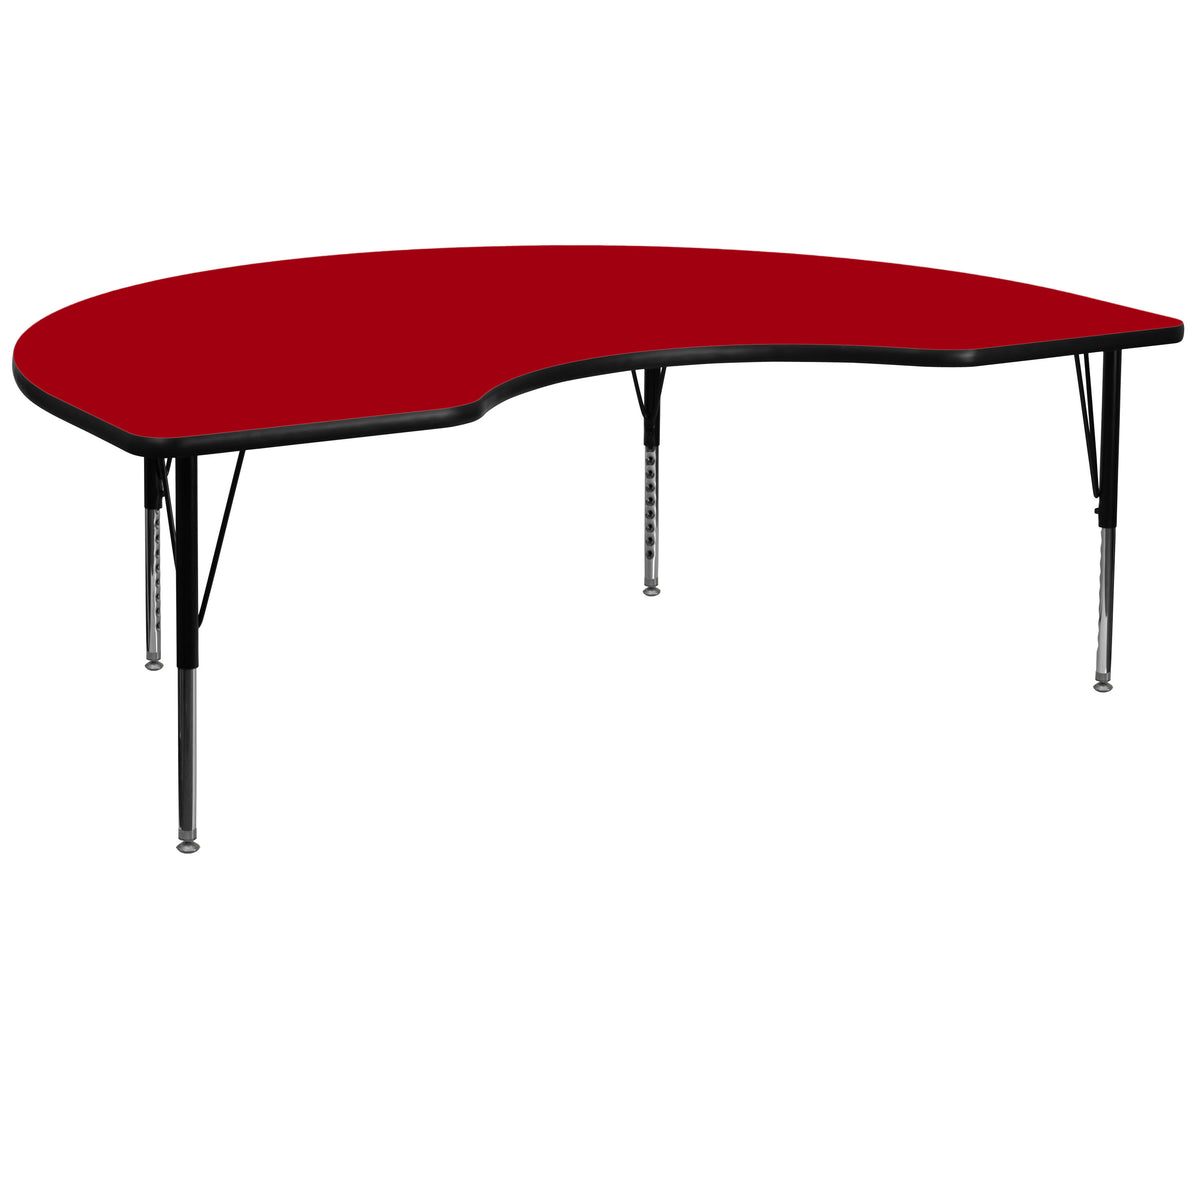 Red |#| 48inchW x 96inchL Kidney Red Thermal Laminate Activity Table - Height Adjustable Legs